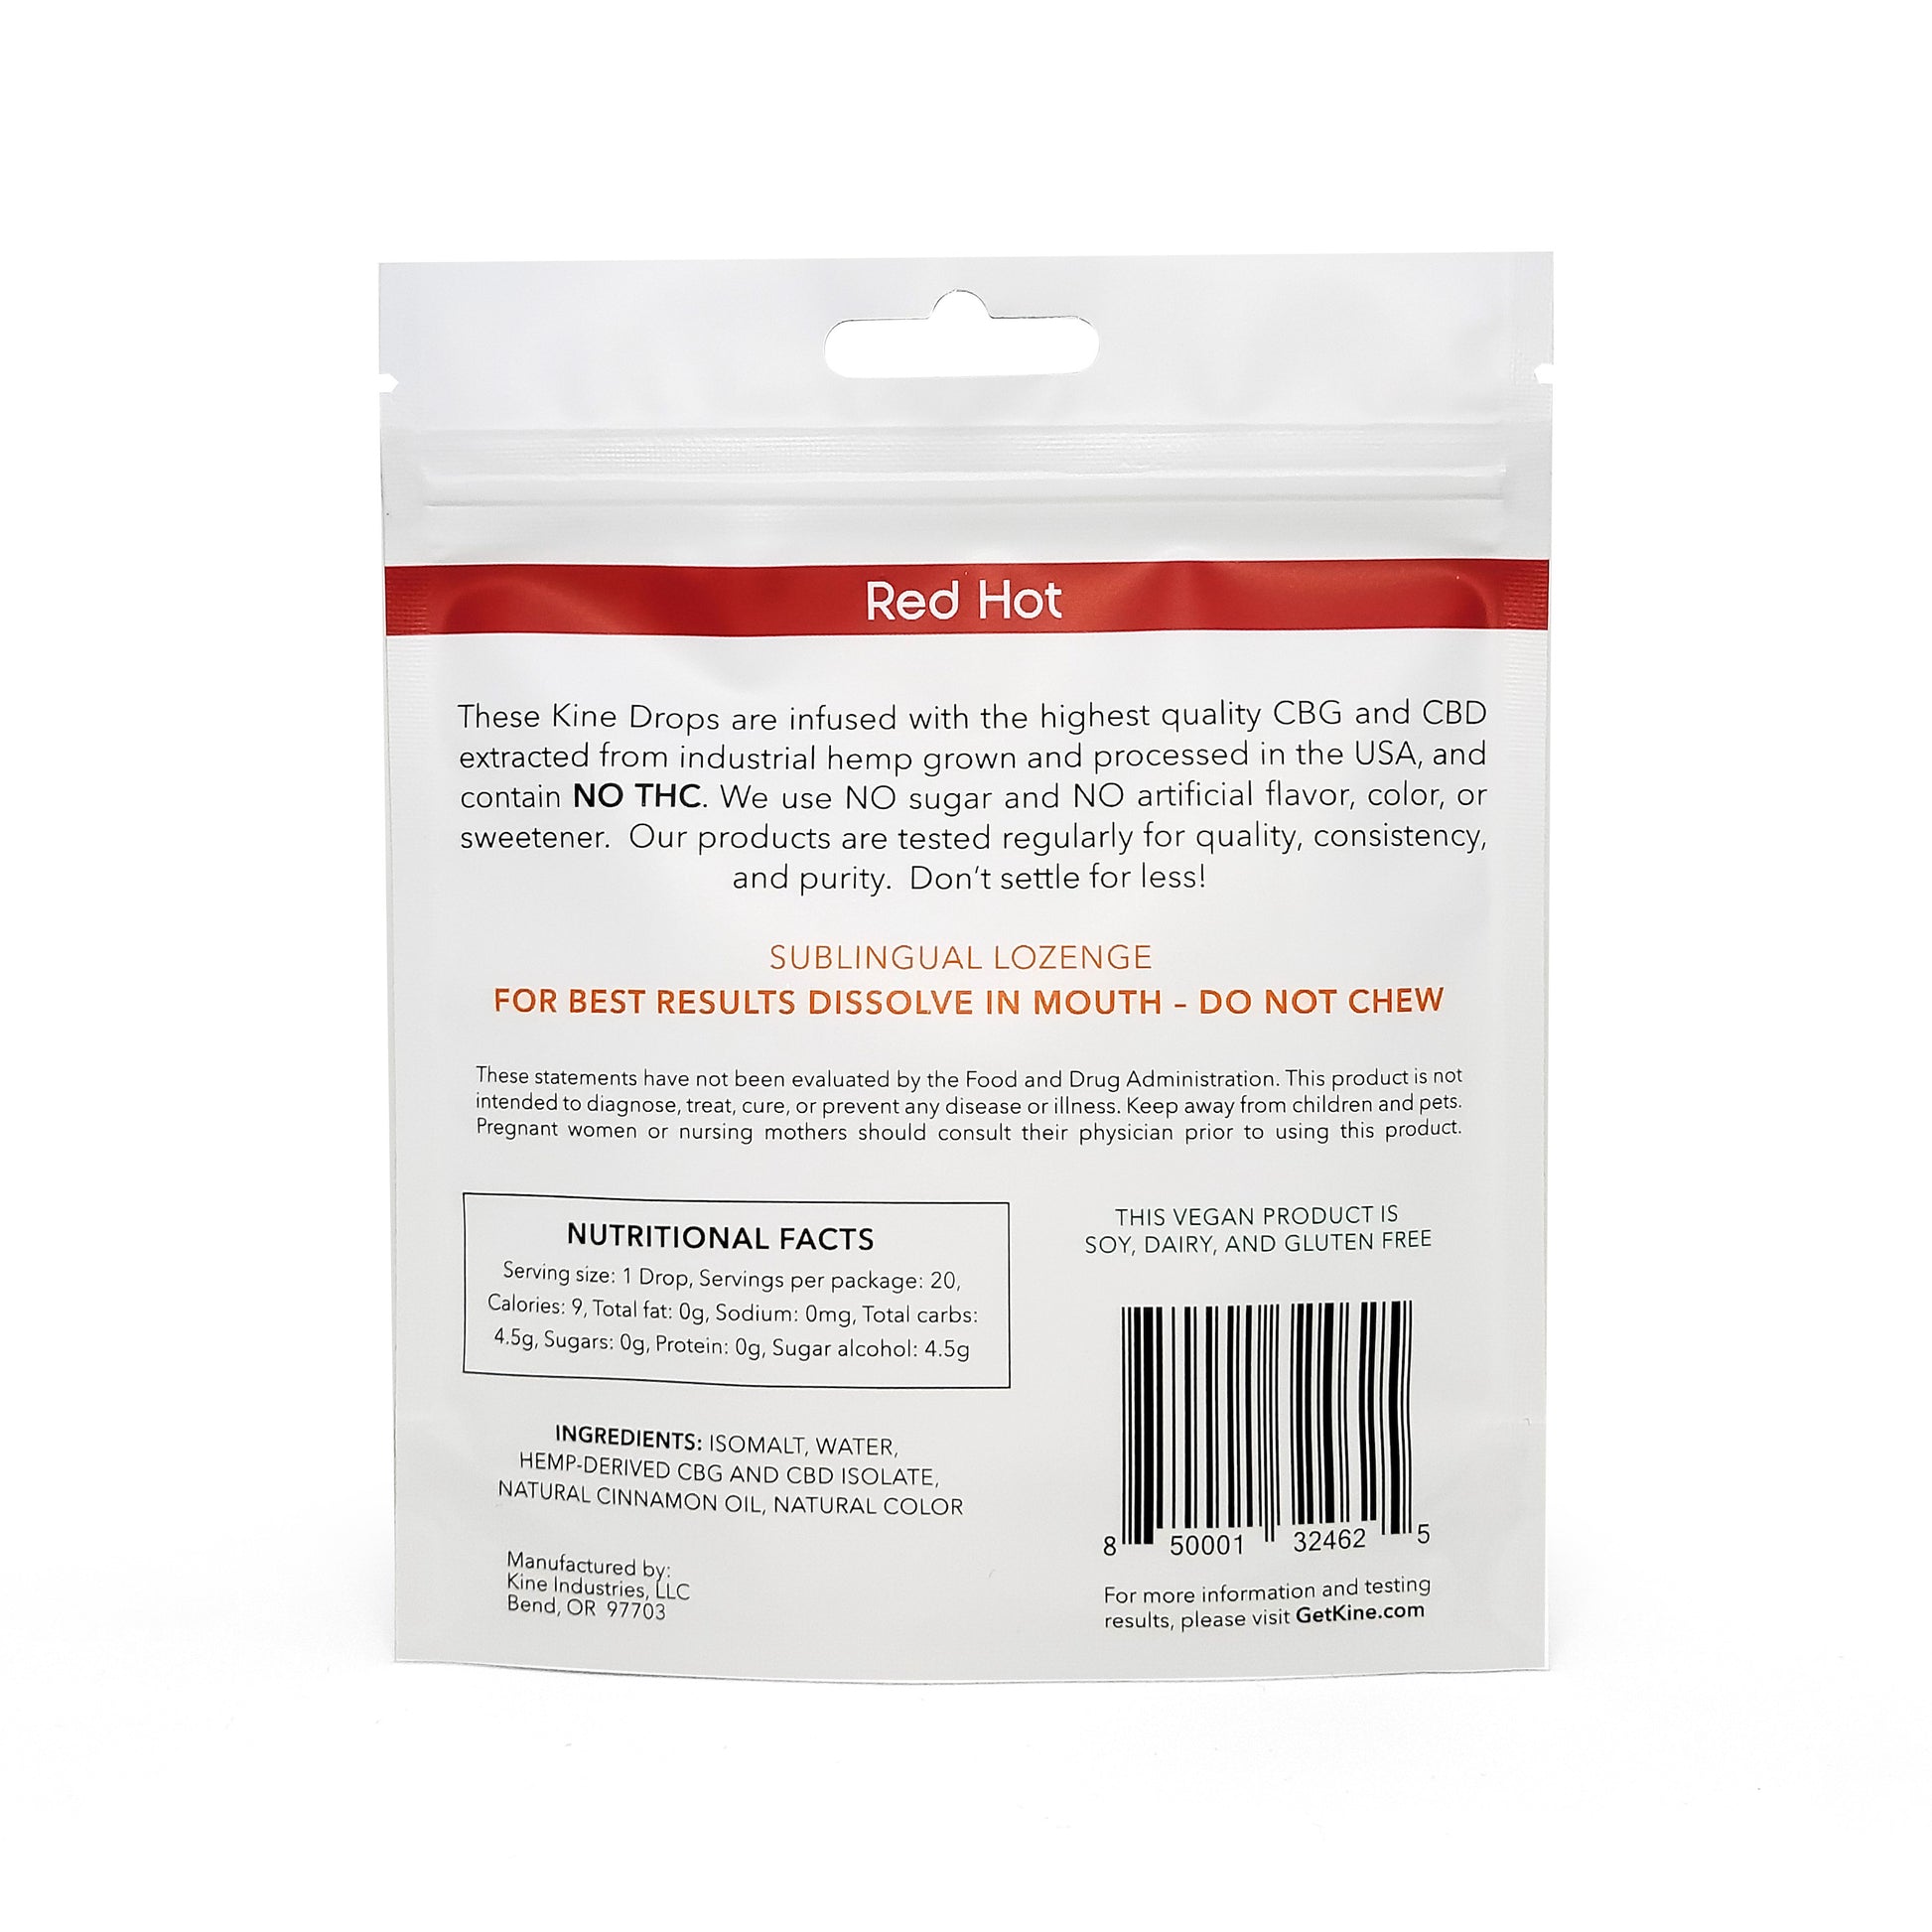 Kine Red Hot Cinnamon Flavored Organic CBG CBD 1:1 50mg 1000mg CBG lozenges drops ingredients list and nutritional facts